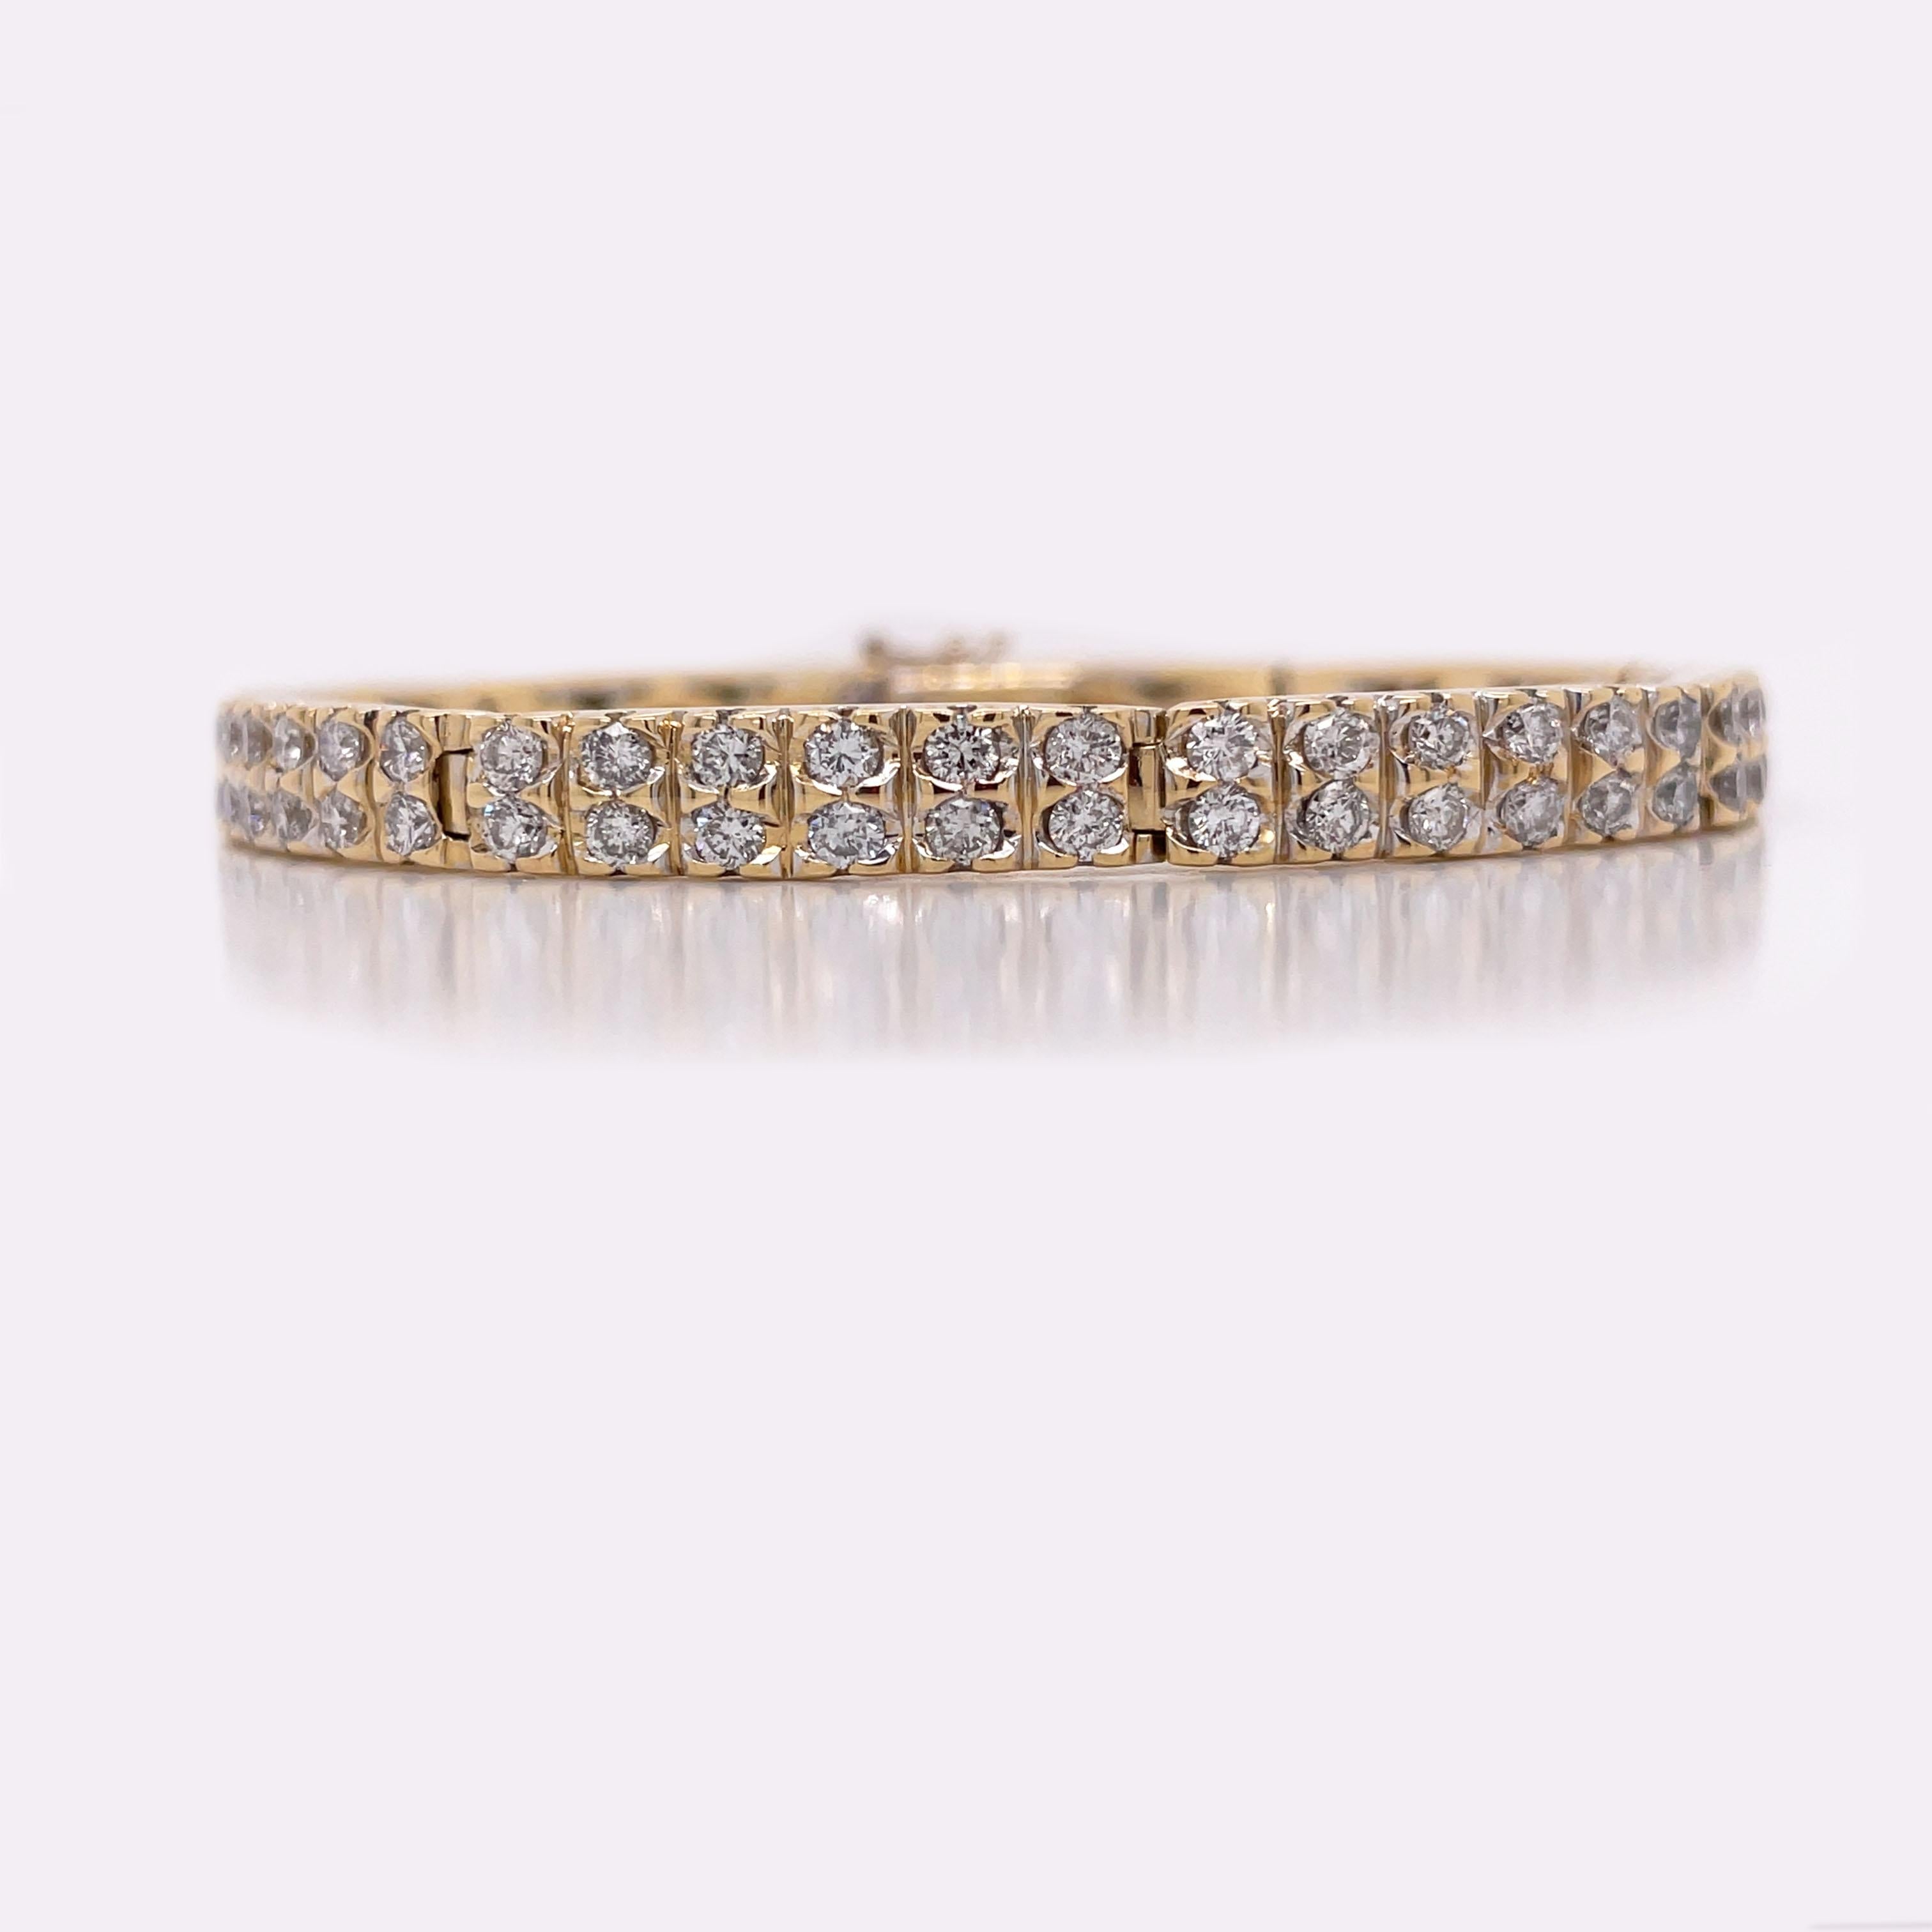 This is a beautiful Contemporary Diamond Bar Bracelet set in 18K Yellow Gold! This bracelet is essential to any woman's jewelry wardrobe! Set in 18K Yellow Gold, this bracelet is composed of 98 diamonds with an approximate weight of 4.18 cttw! Can